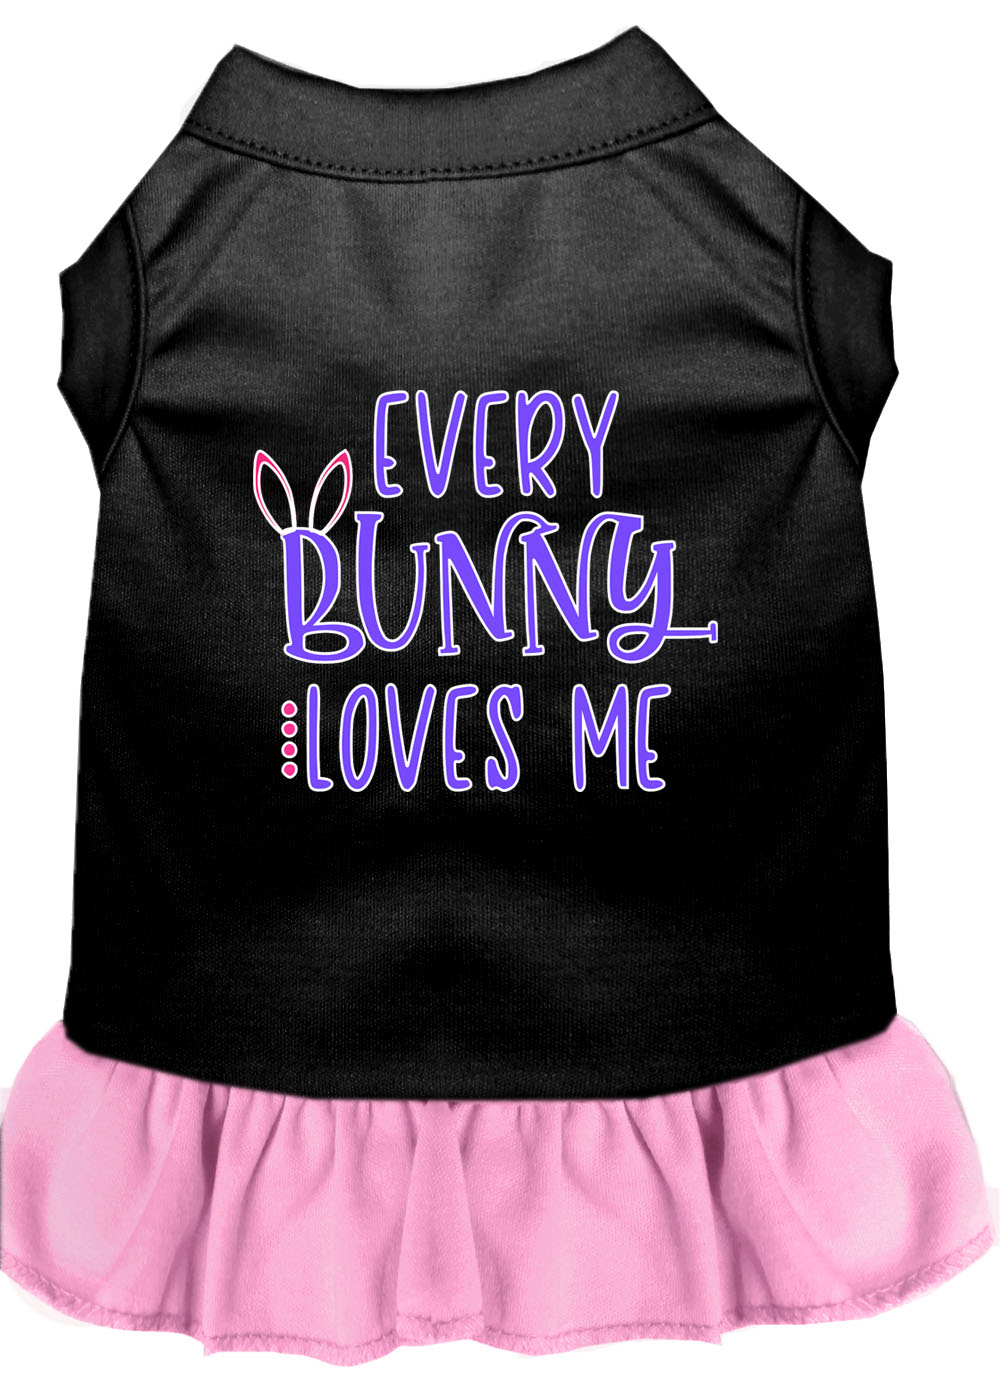 Every Bunny Loves me Screen Print Dog Dress Black with Light Pink XS